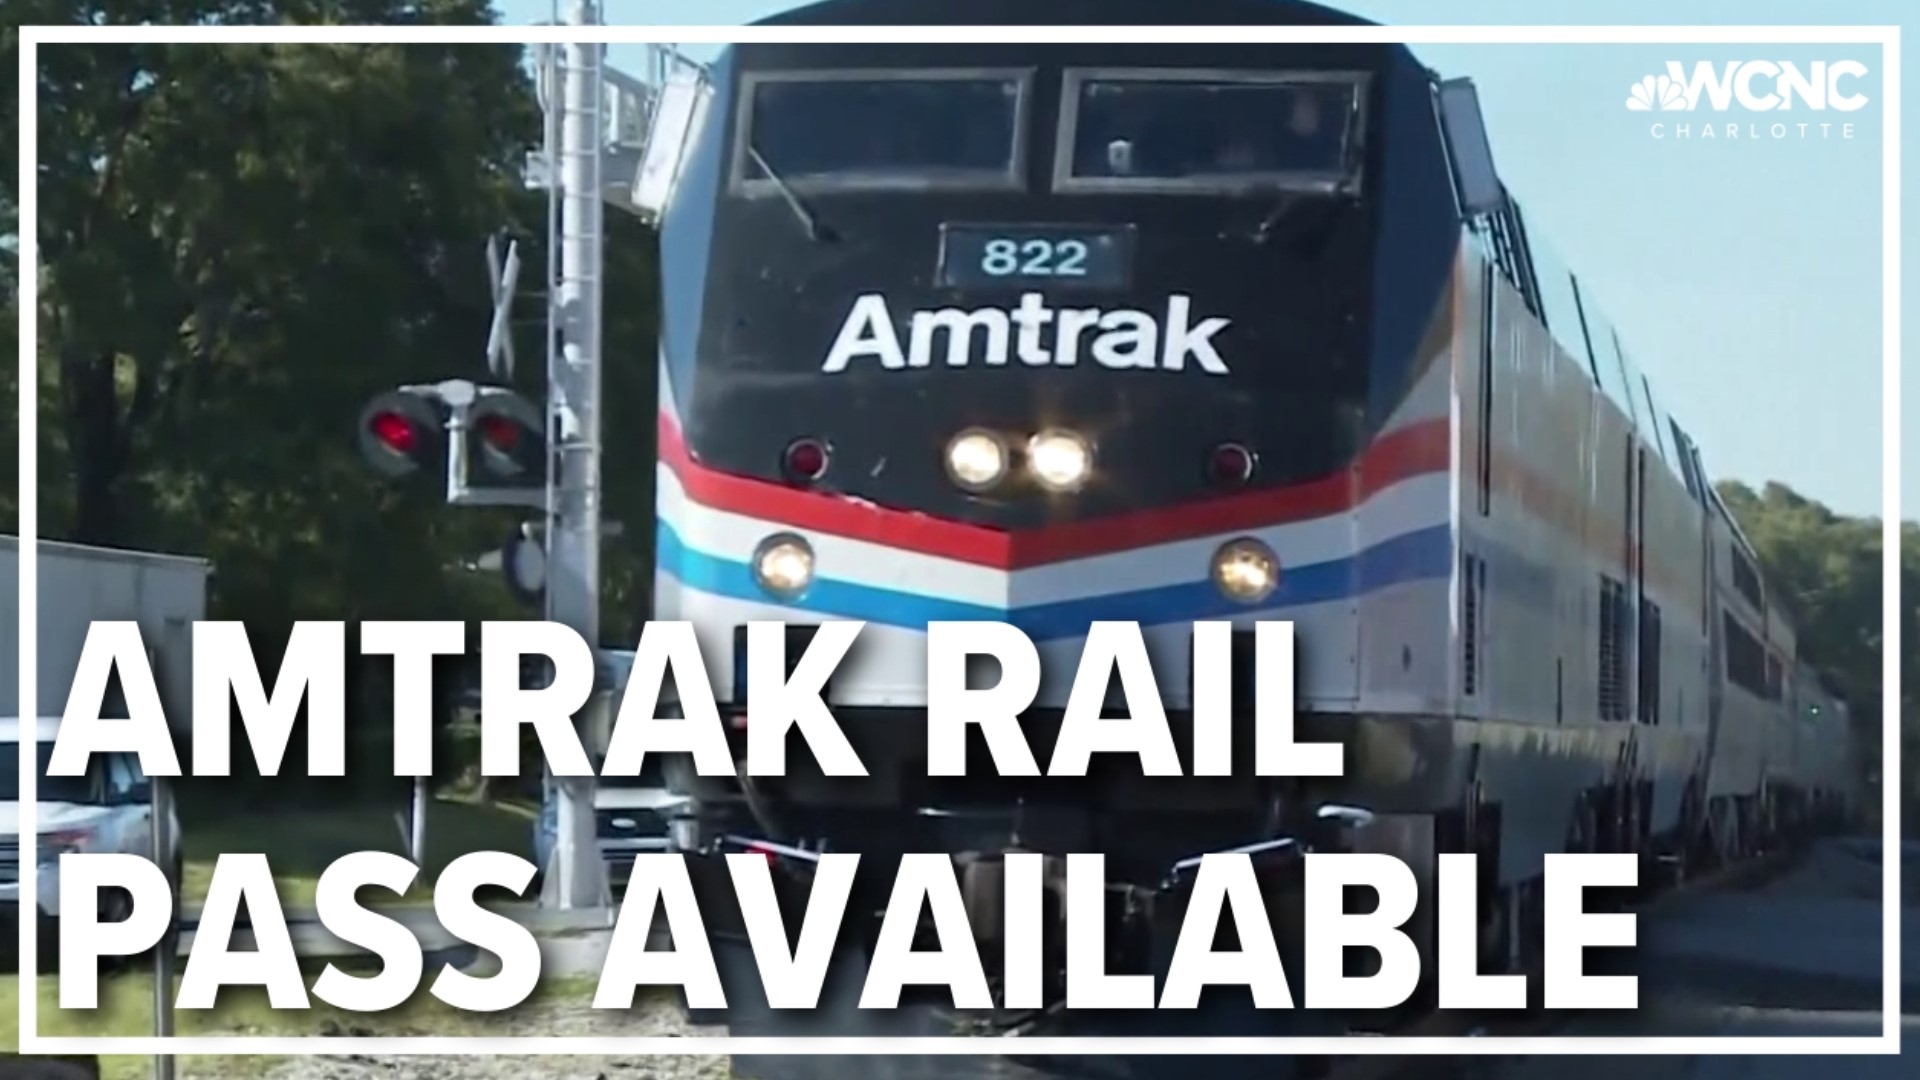 More than 500 cities throughout the country are accessible by train. The sale ends on Jan. 20.